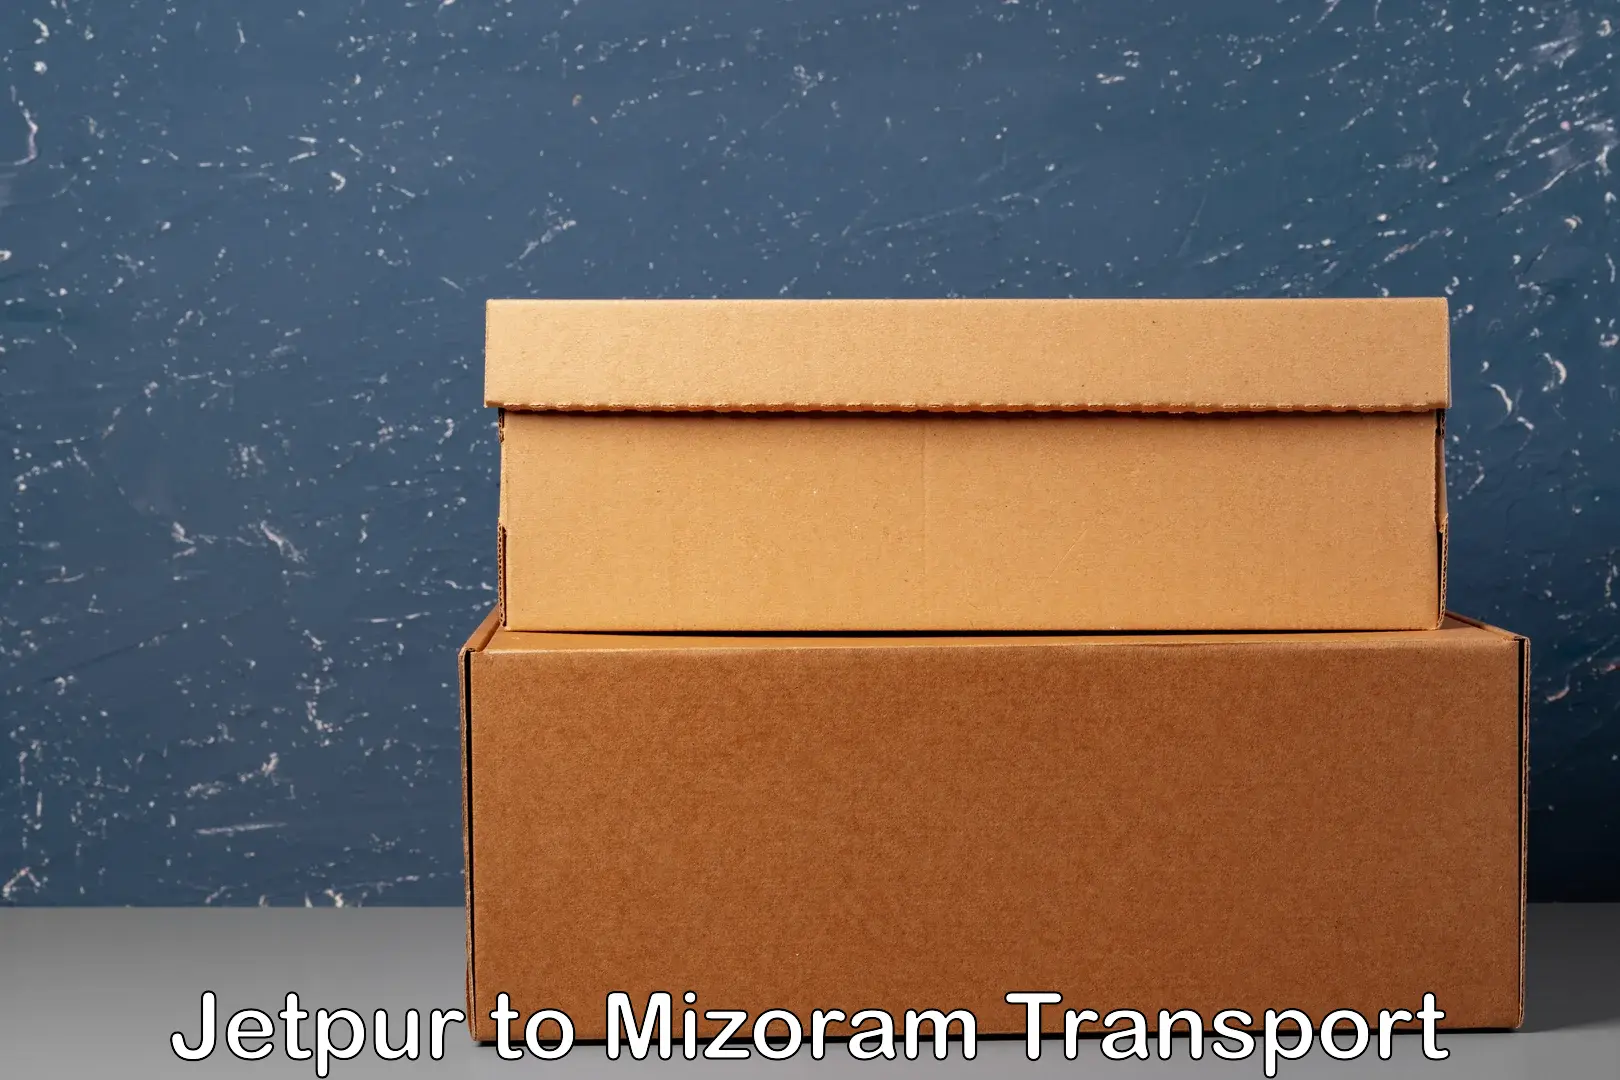 Scooty transport charges Jetpur to Mizoram